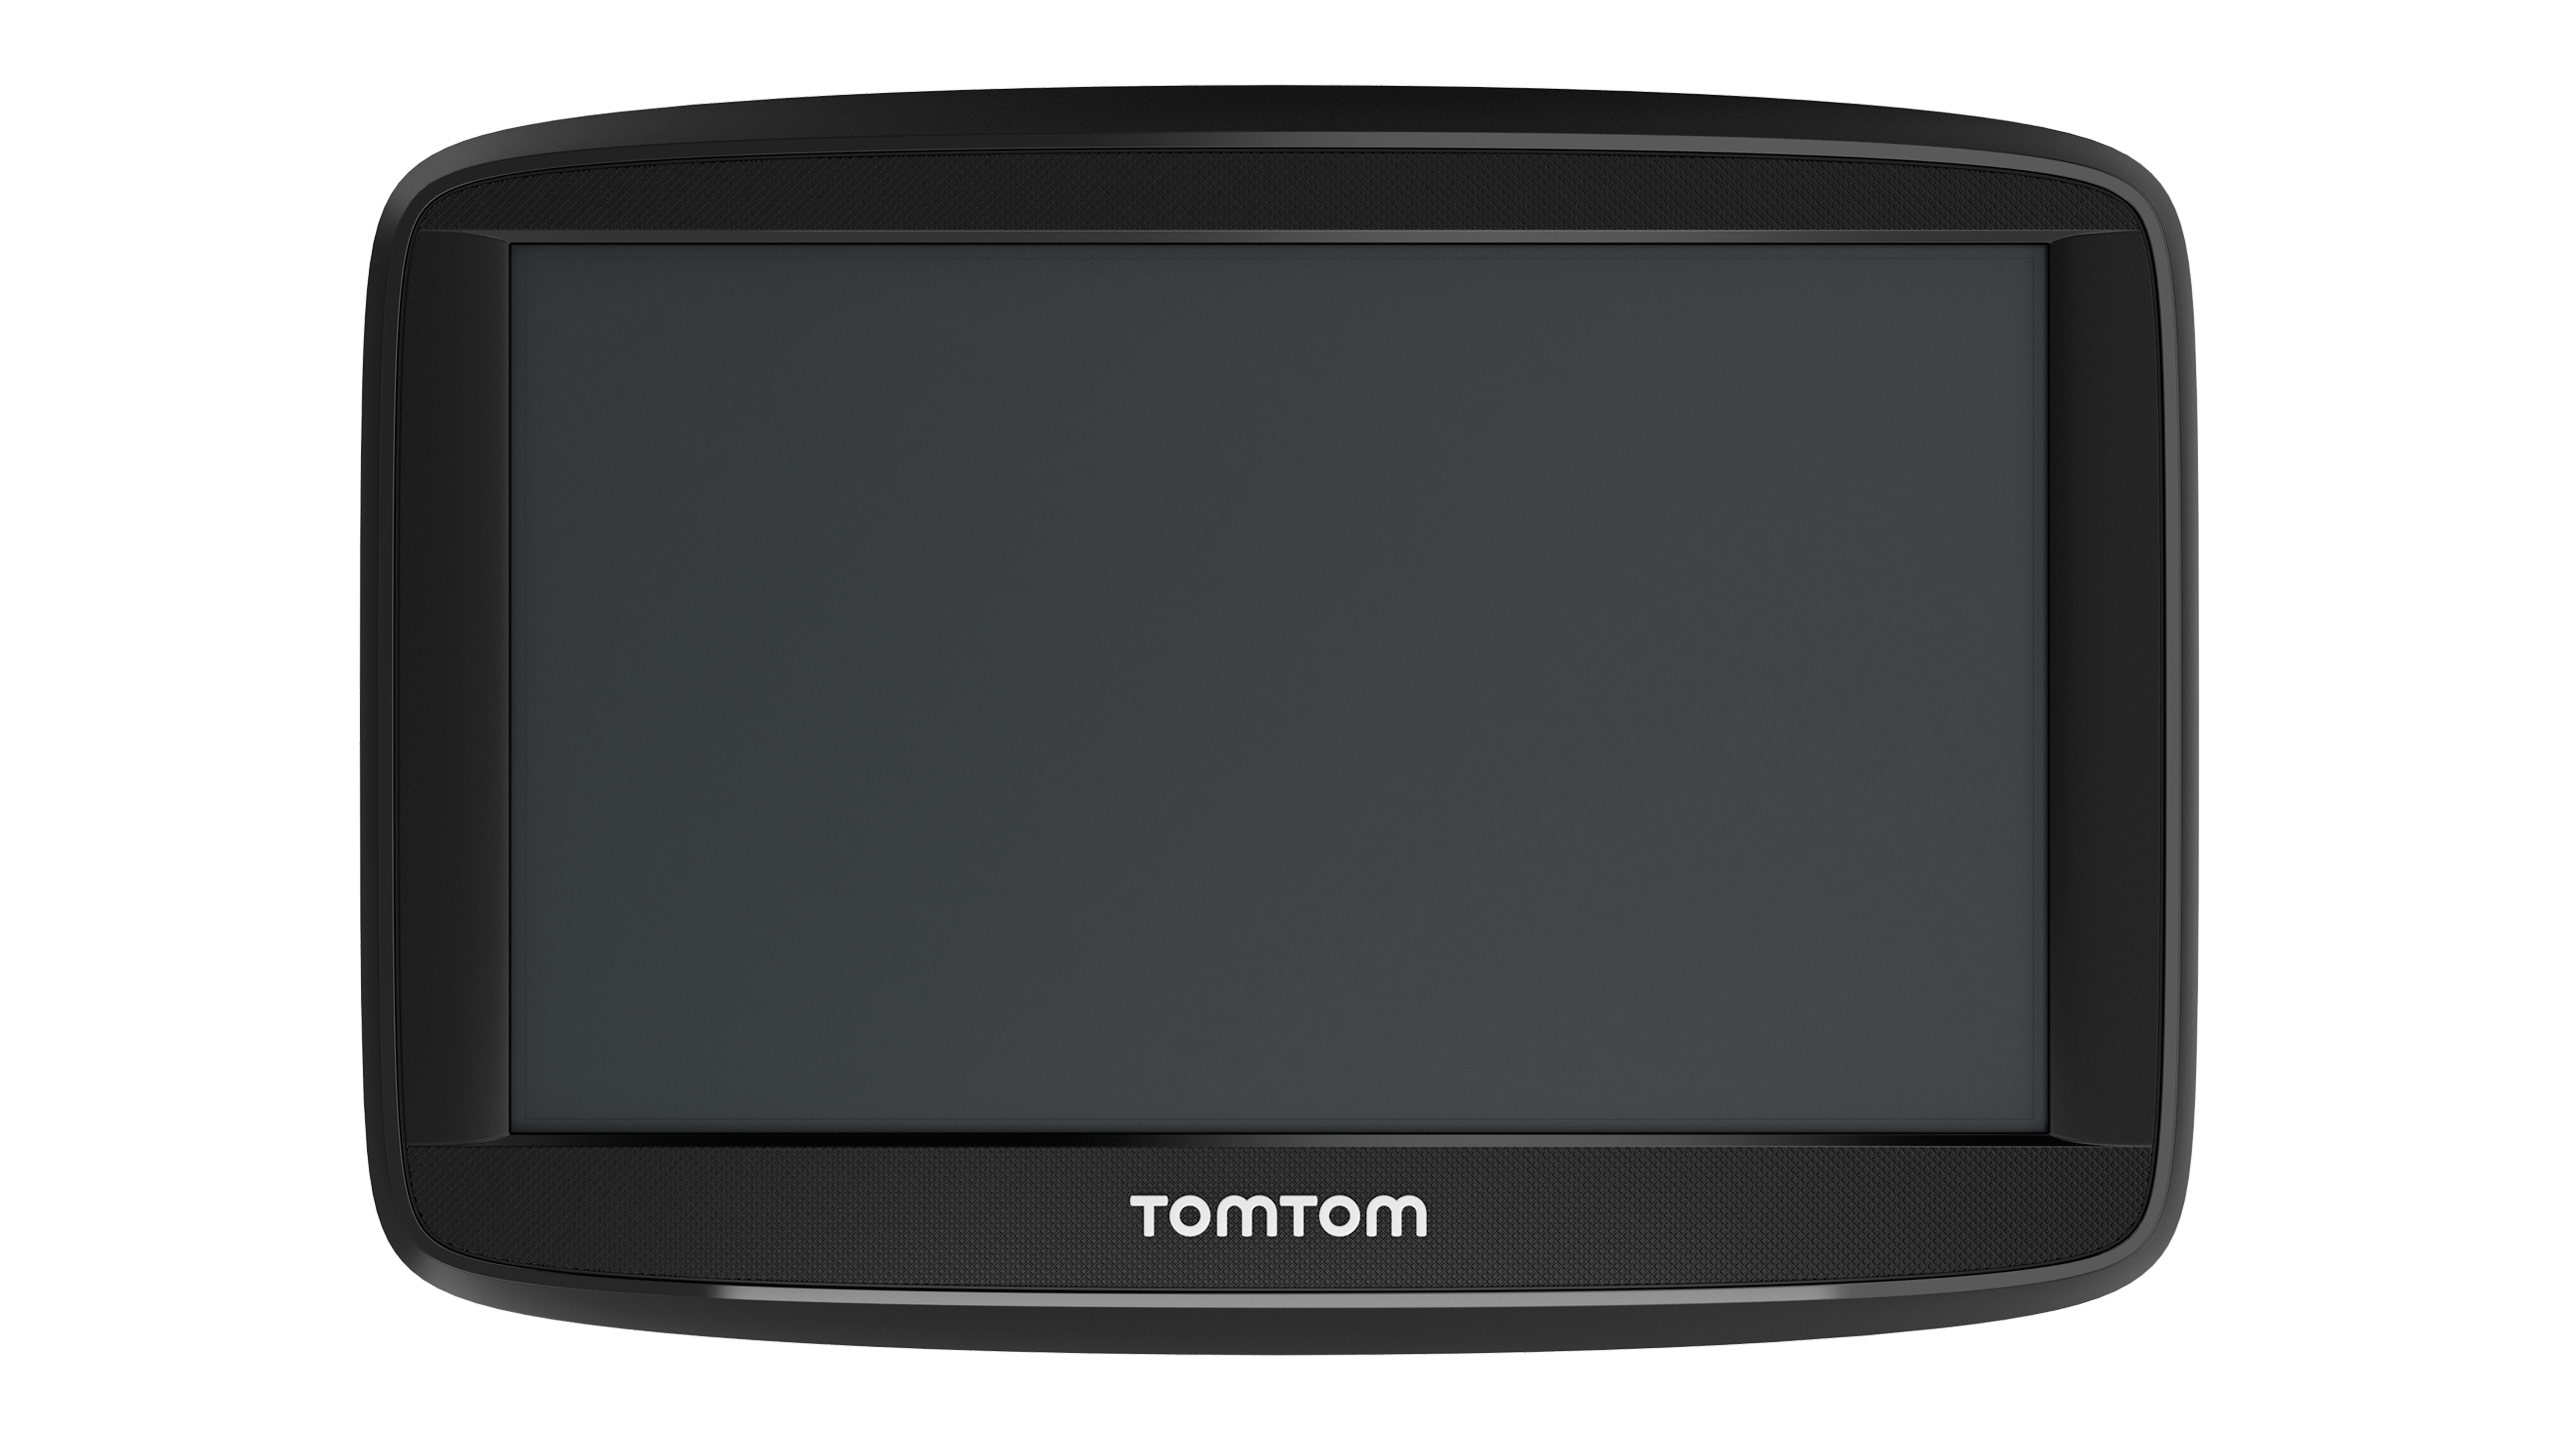 install tomtom home on my computer